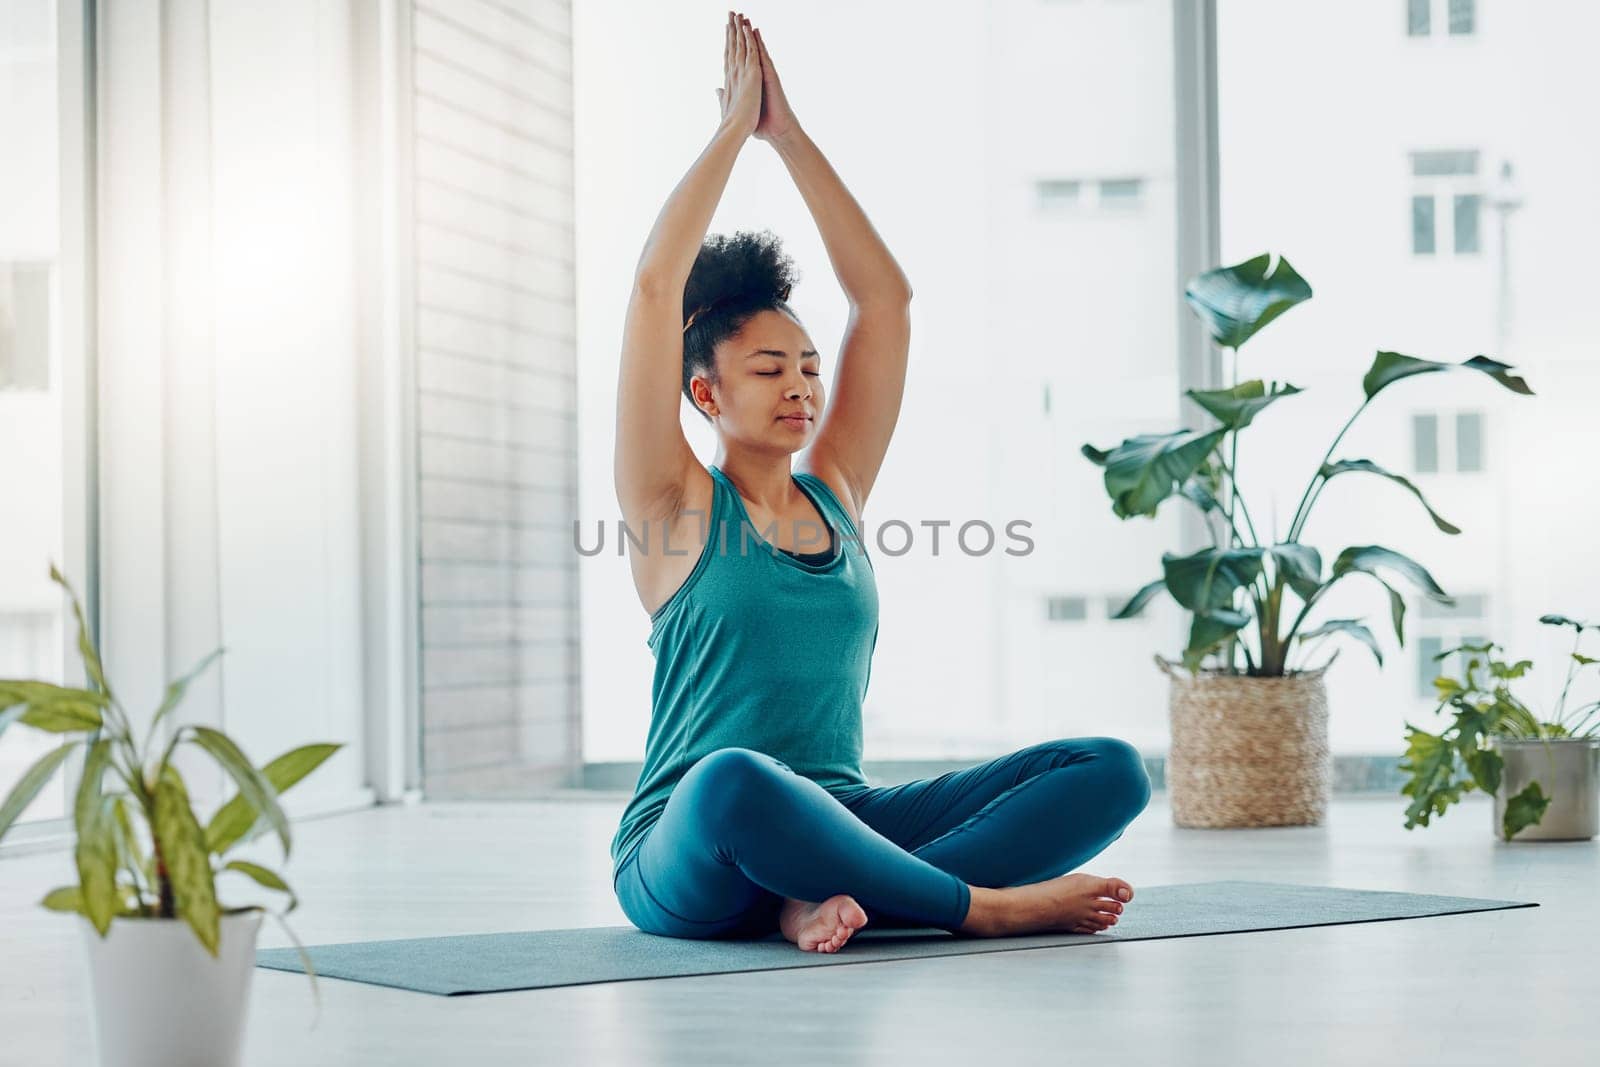 Yoga, meditation exercise and black woman prayer hands for fitness, peace and wellness. Young person in health studio for holistic workout, mental health and body balance with zen mind and energy.